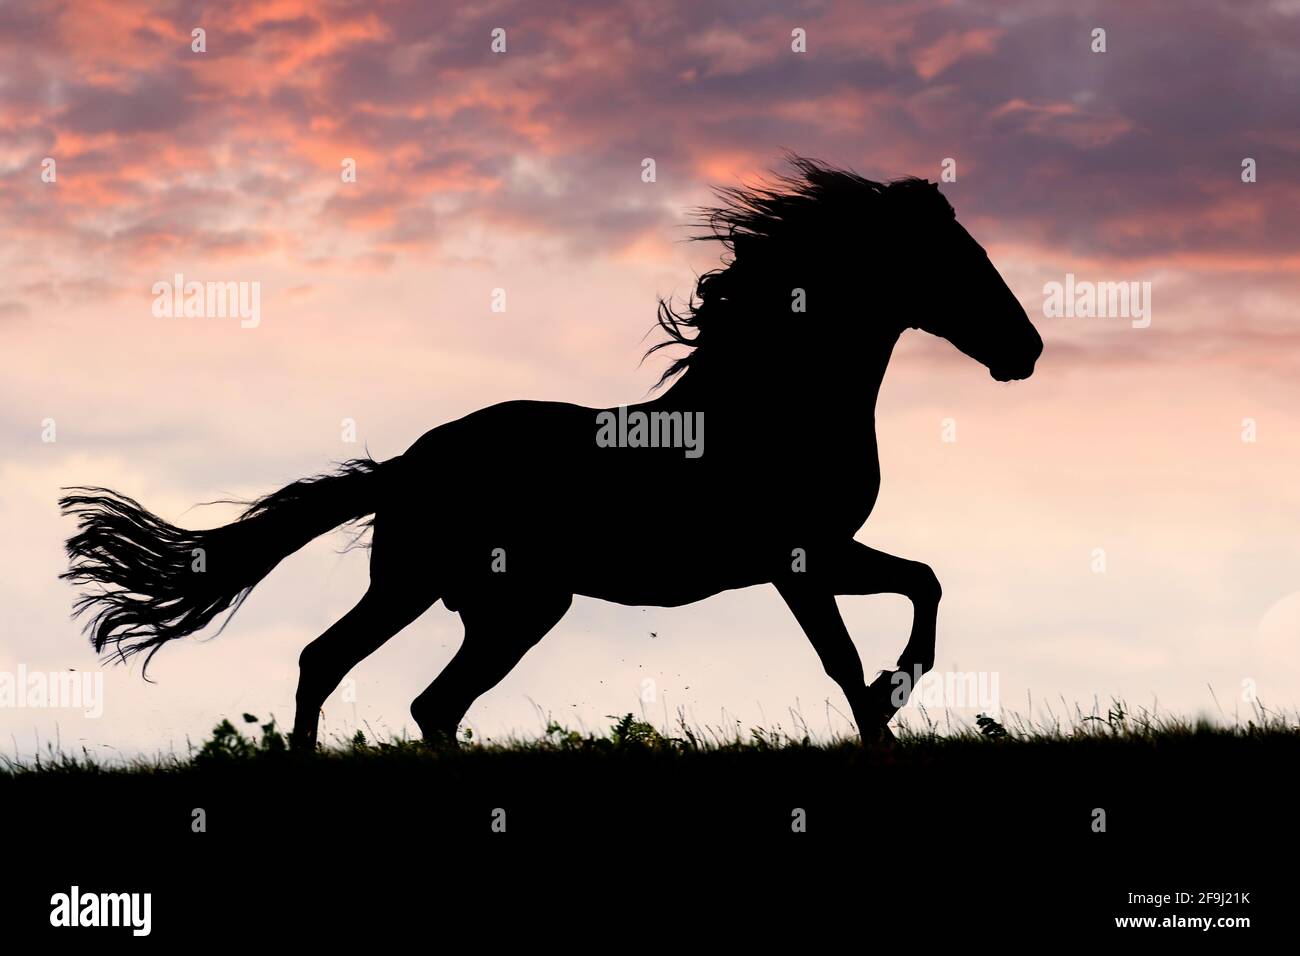 Black Horse Gallop In Sunset Stock Photo - Download Image Now